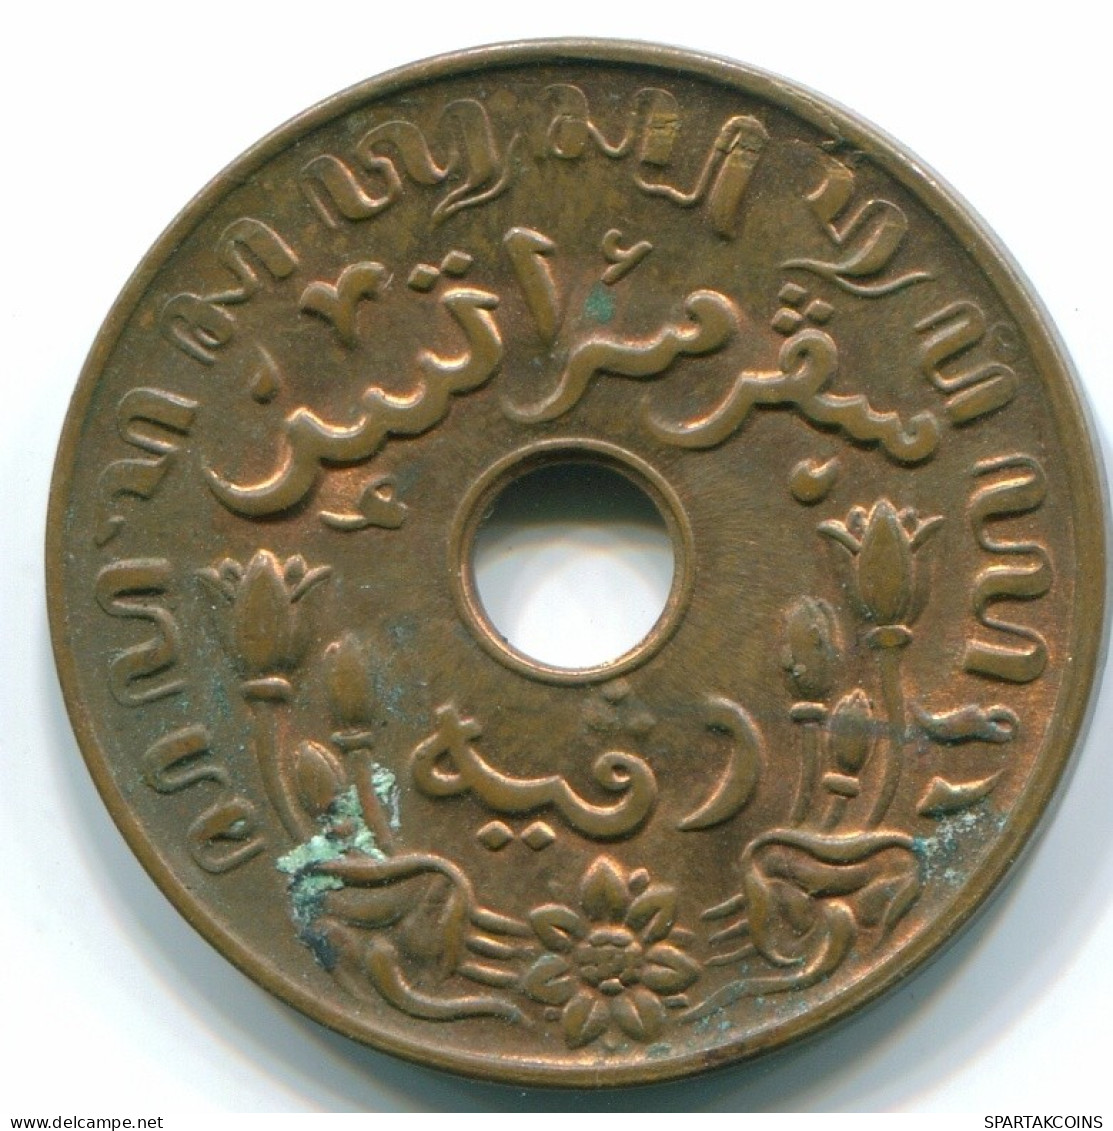 1 CENT 1945 S NETHERLANDS EAST INDIES INDONESIA Bronze Colonial Coin #S10371.U.A - Indes Neerlandesas